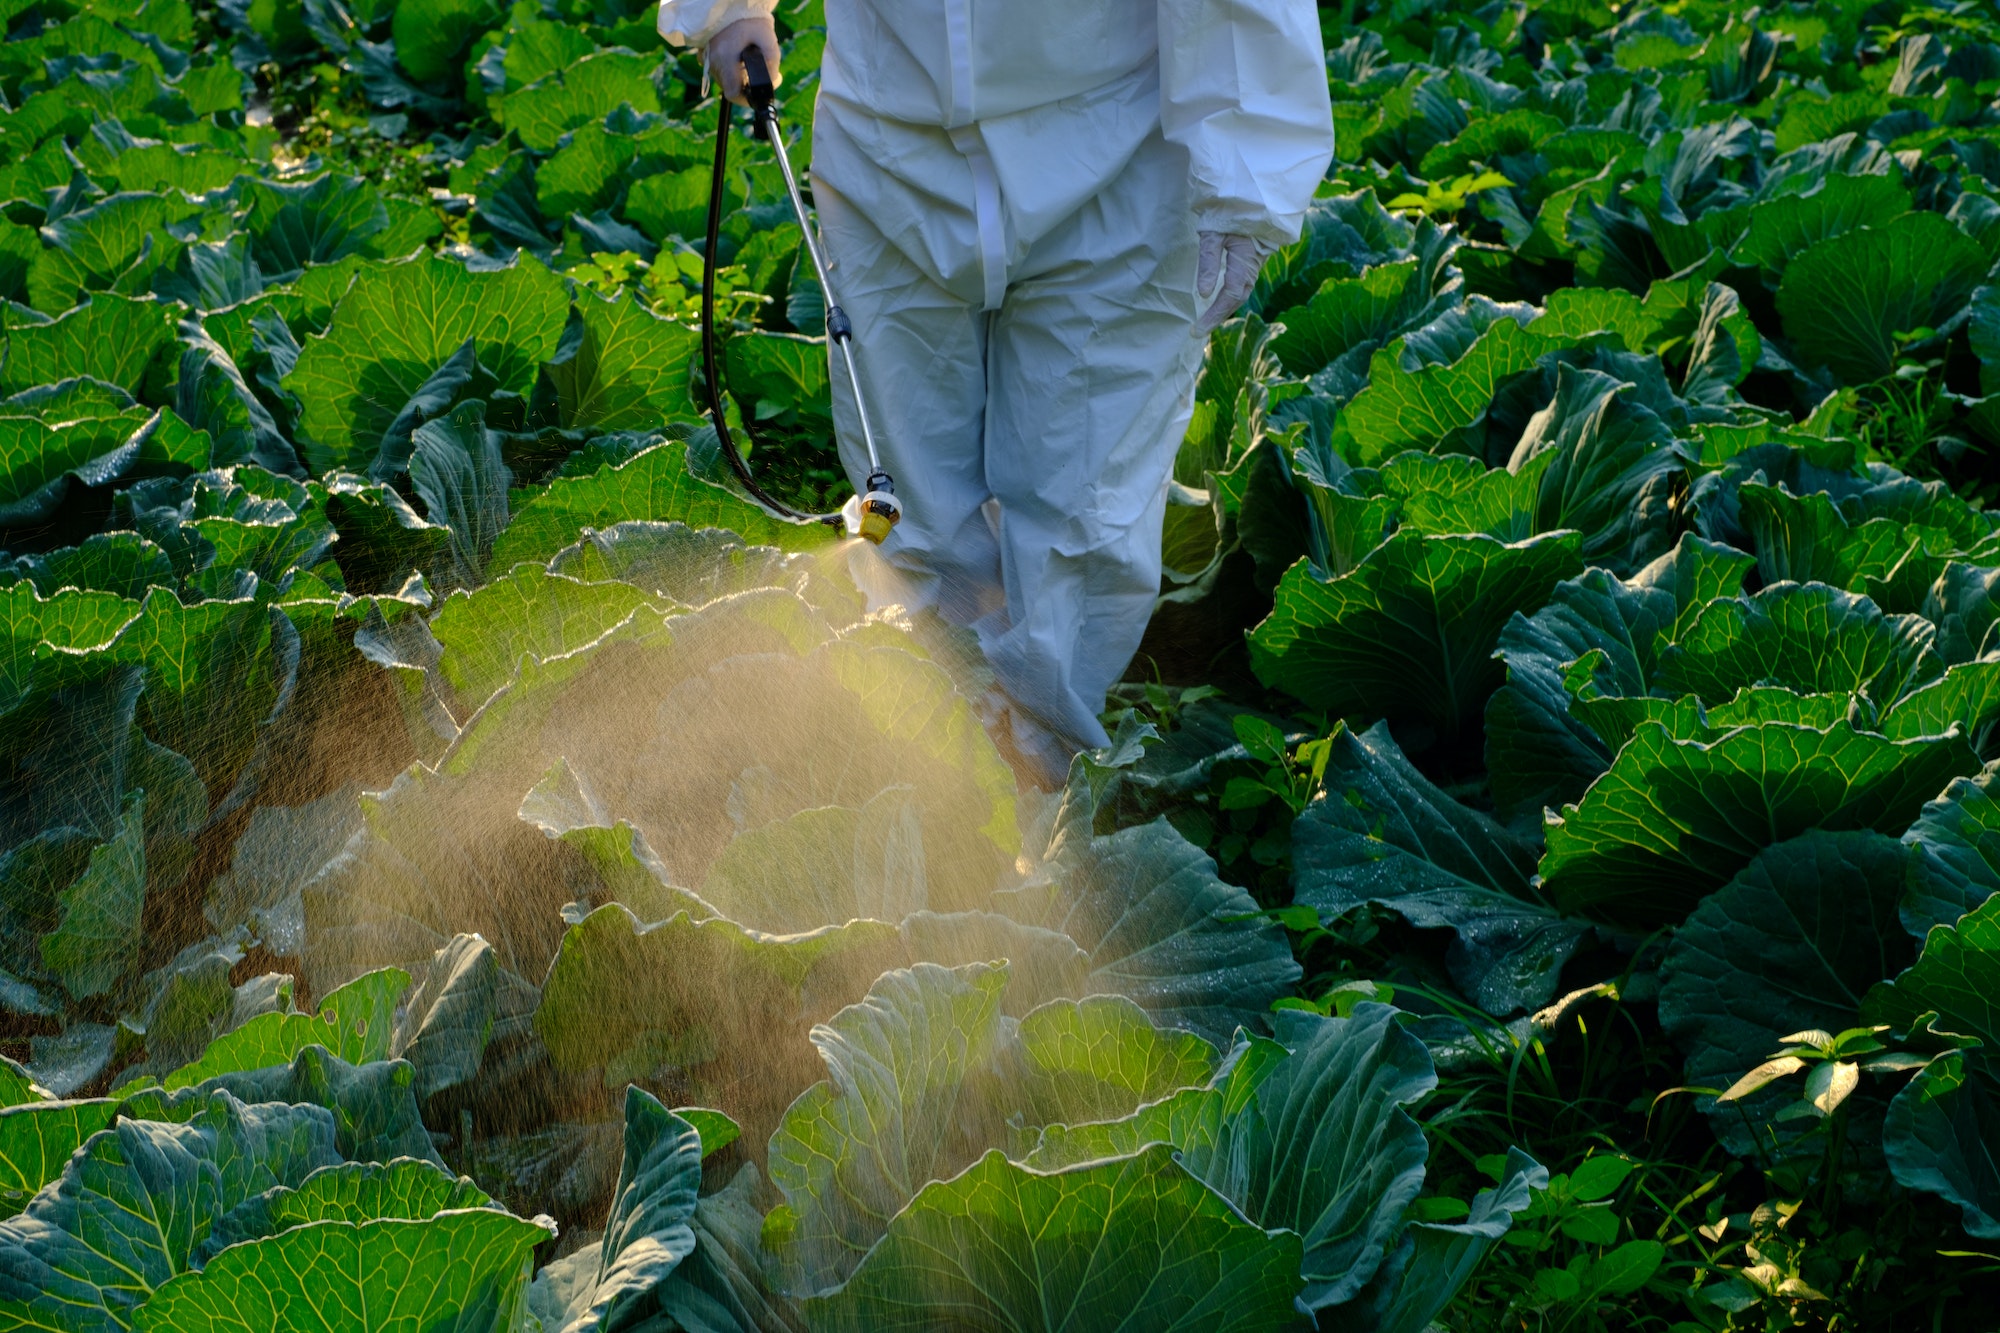 Gardener in a protective suit spray Insecticide and chemistry on cabbage vegetable plant